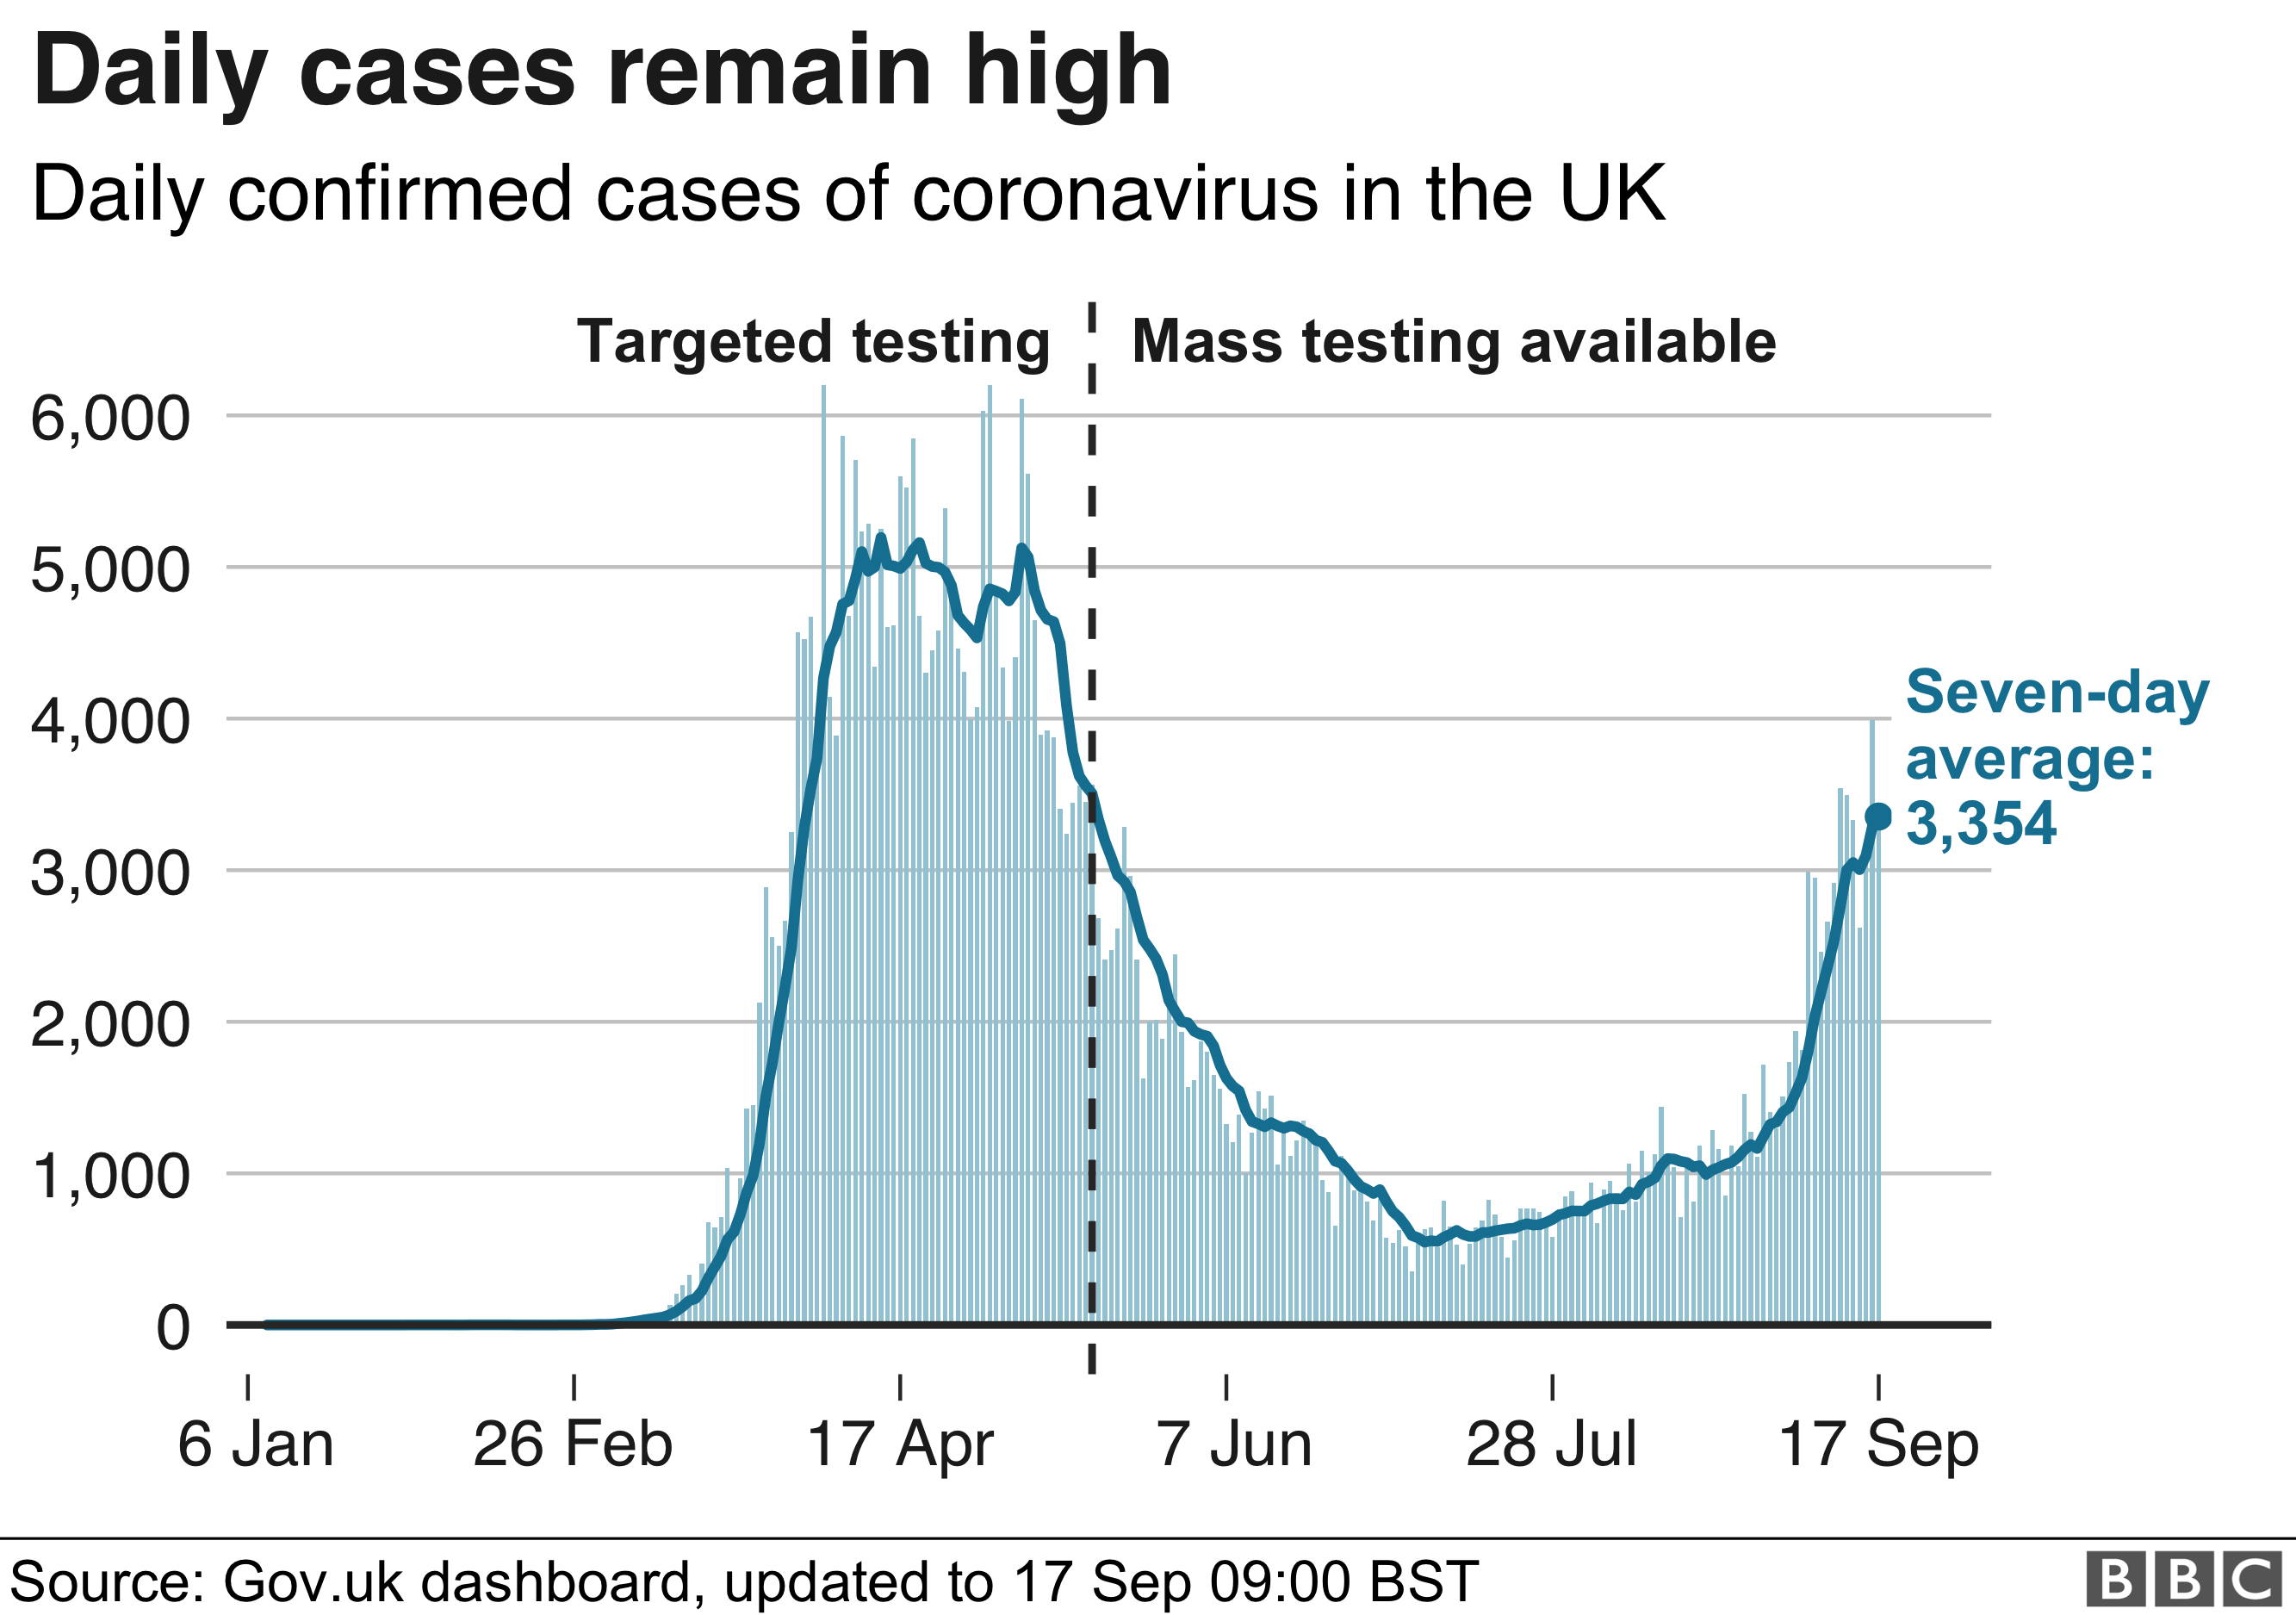 UK daily cases remain high 18-9-2020 - enlarge